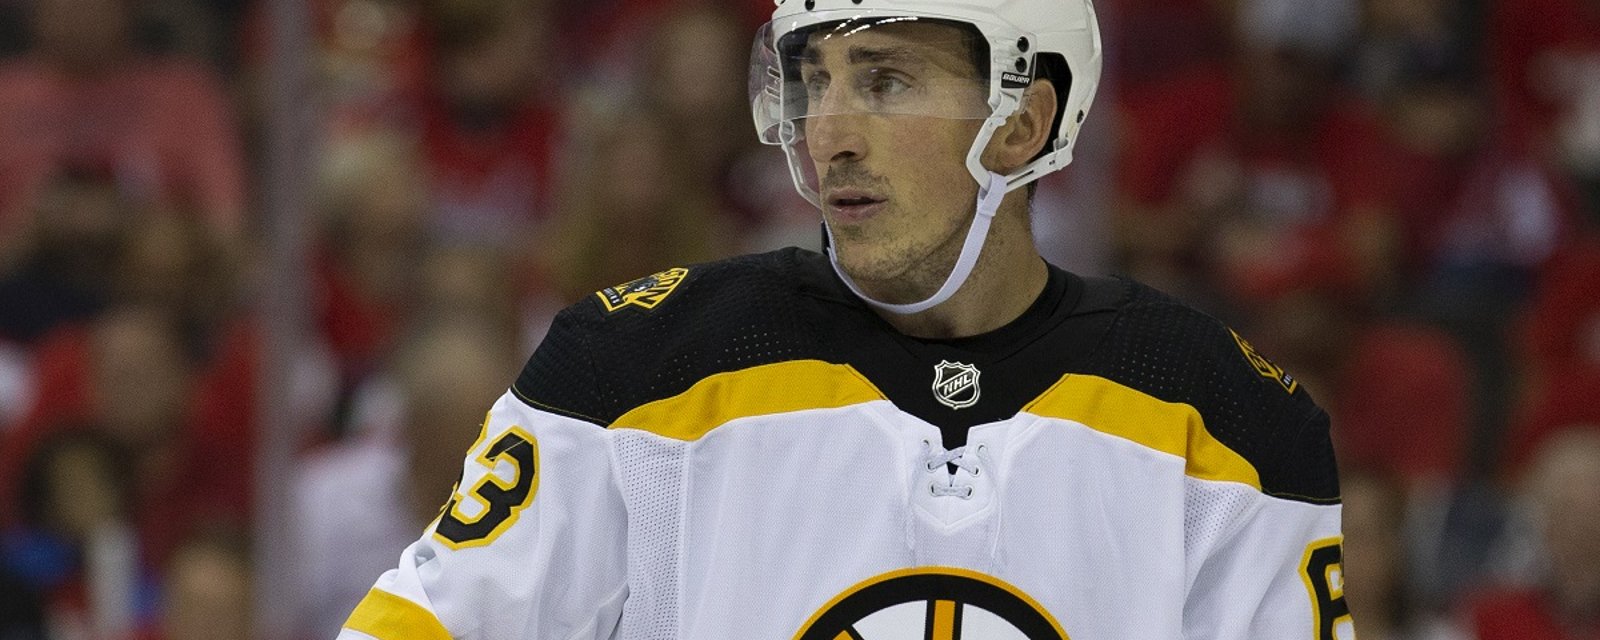 Marchand concerned about a major disadvantage for the Bruins on home ice in Game 7.